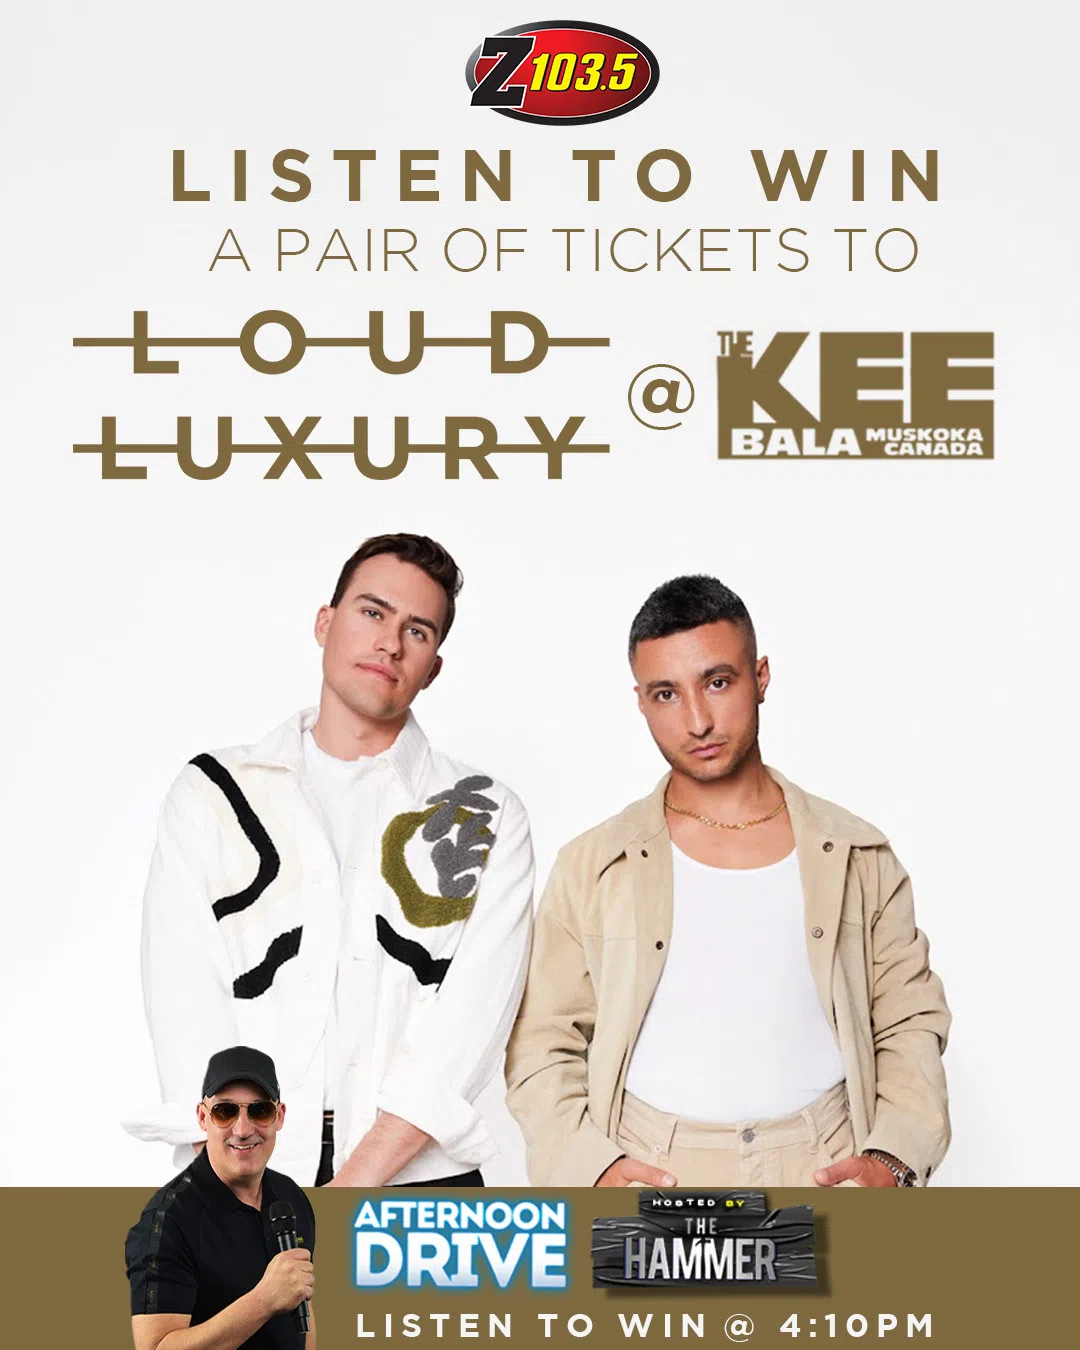 Feature: https://z1035.com/win/win-tickets-to-see-loud-luxury-at-the-kee-to-bala/